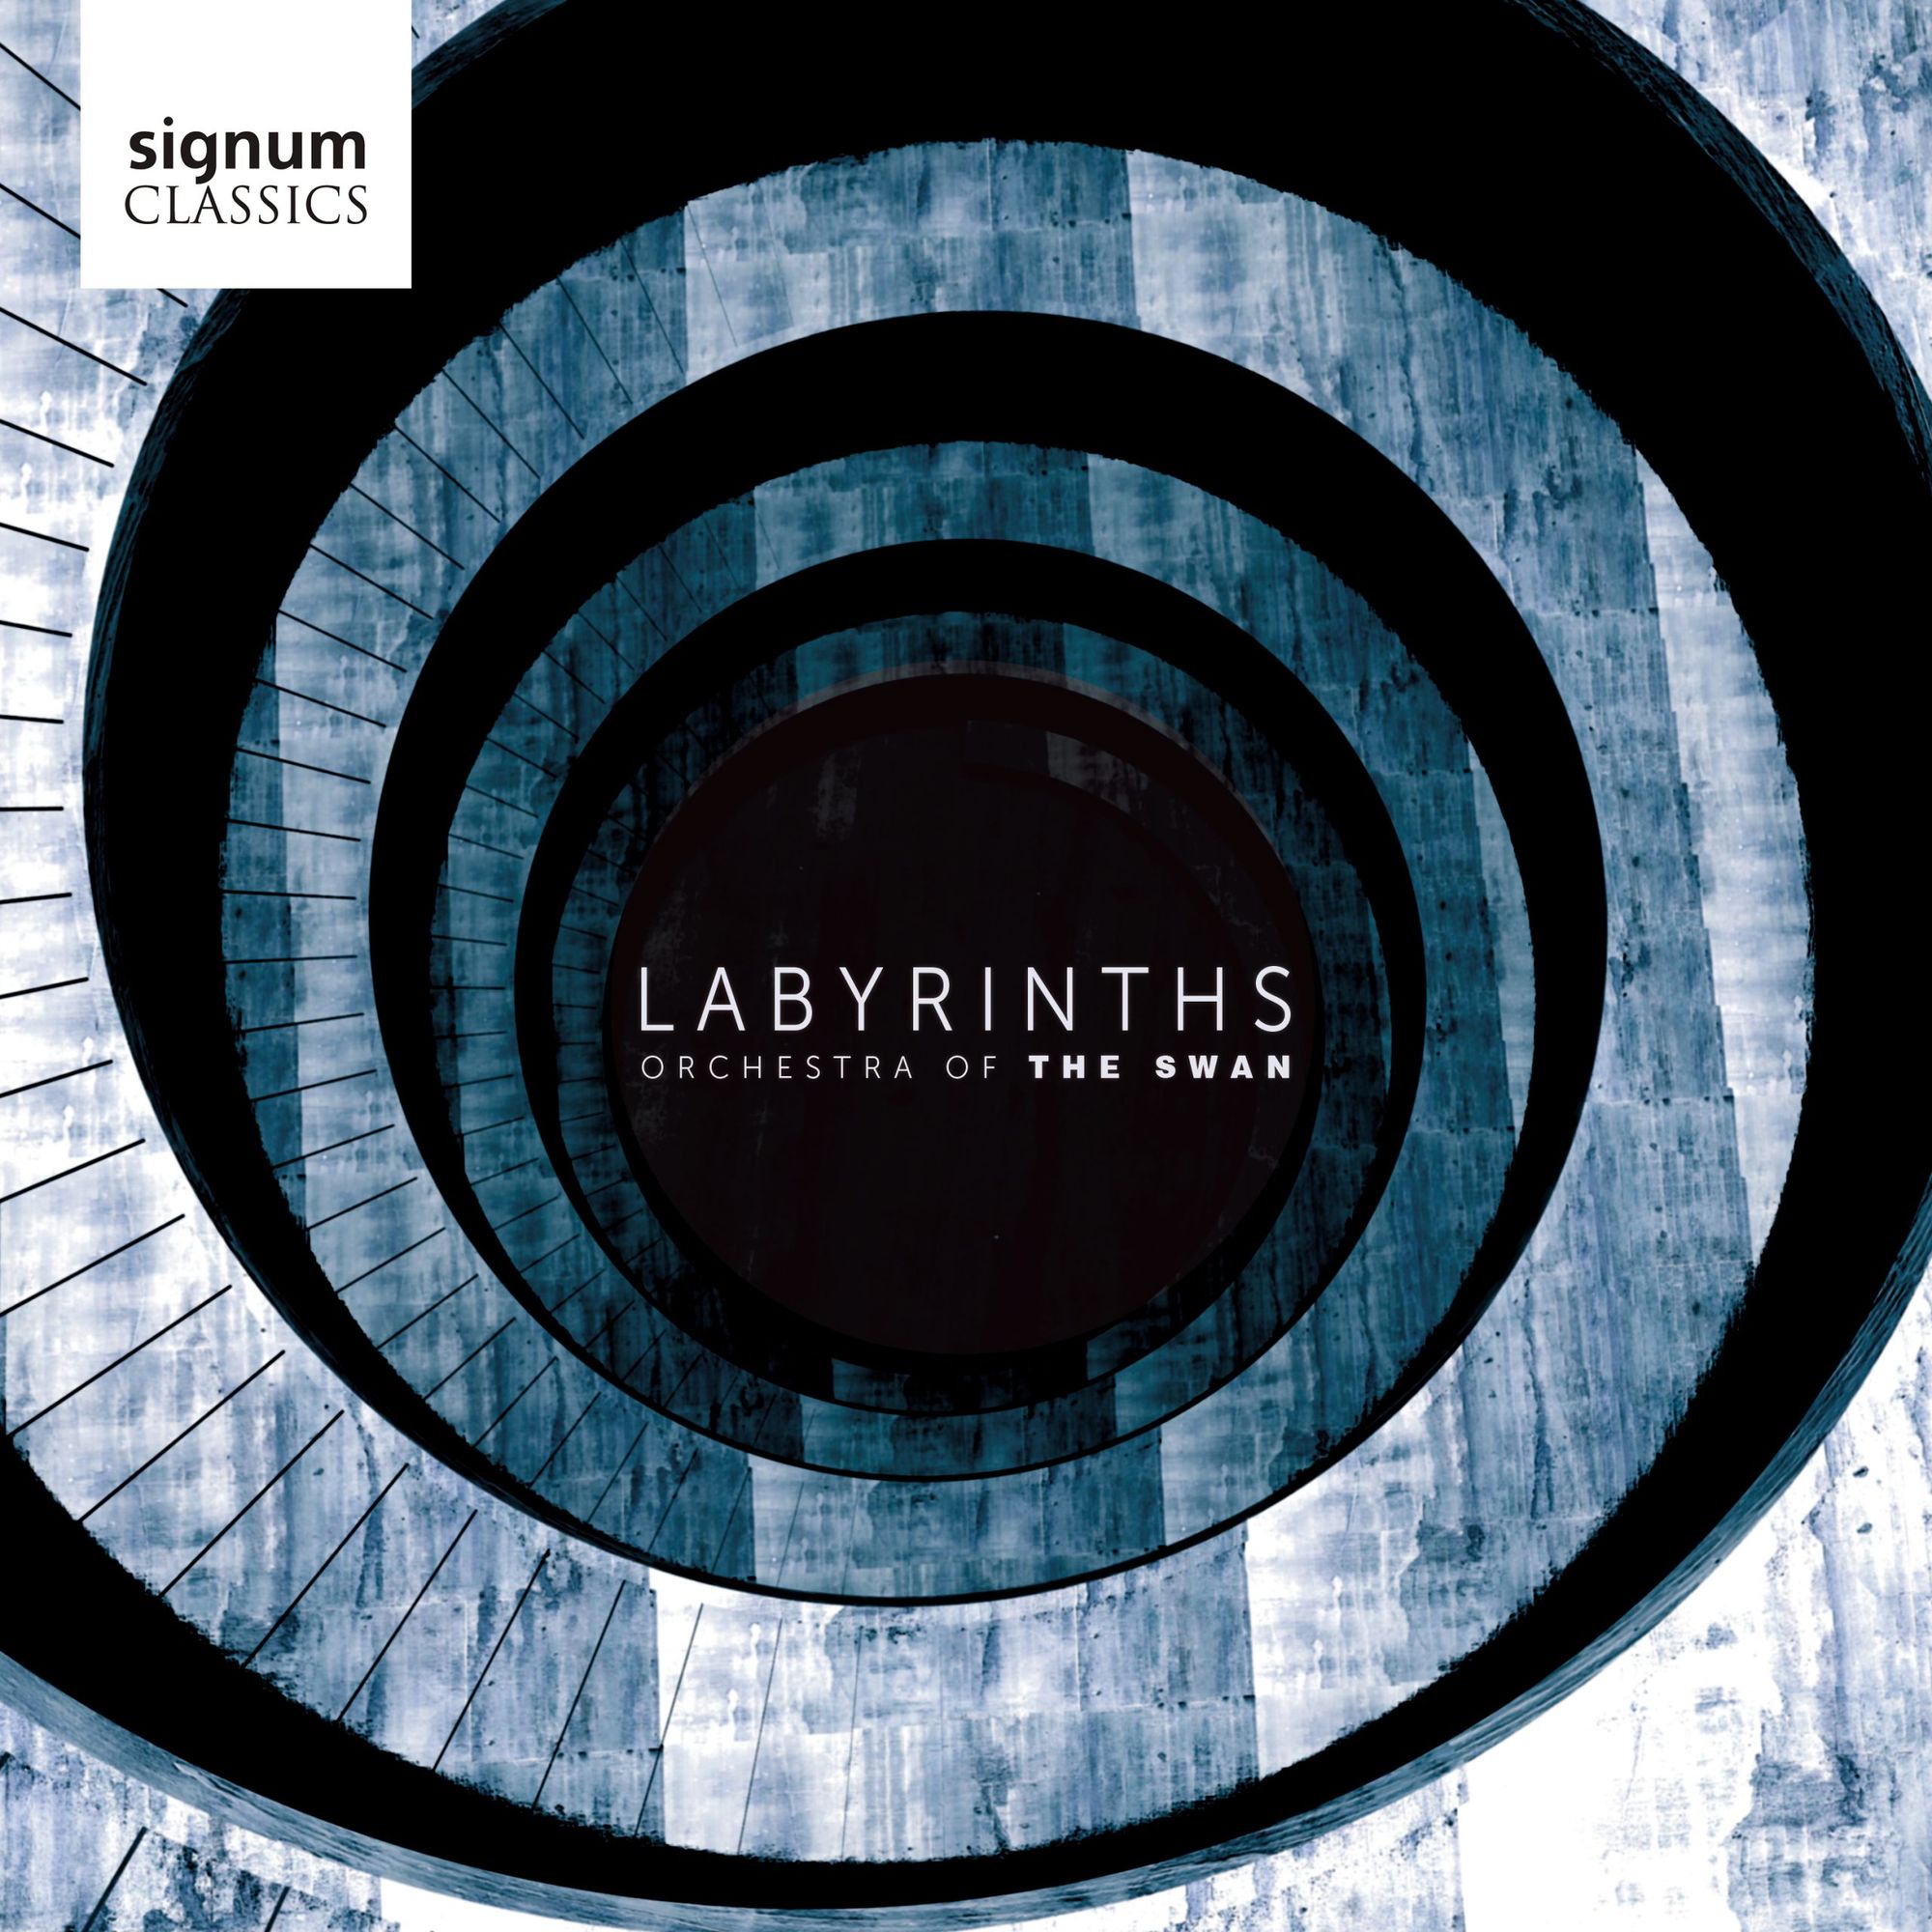 Labyrinths: The Orchestra of the Swan returns